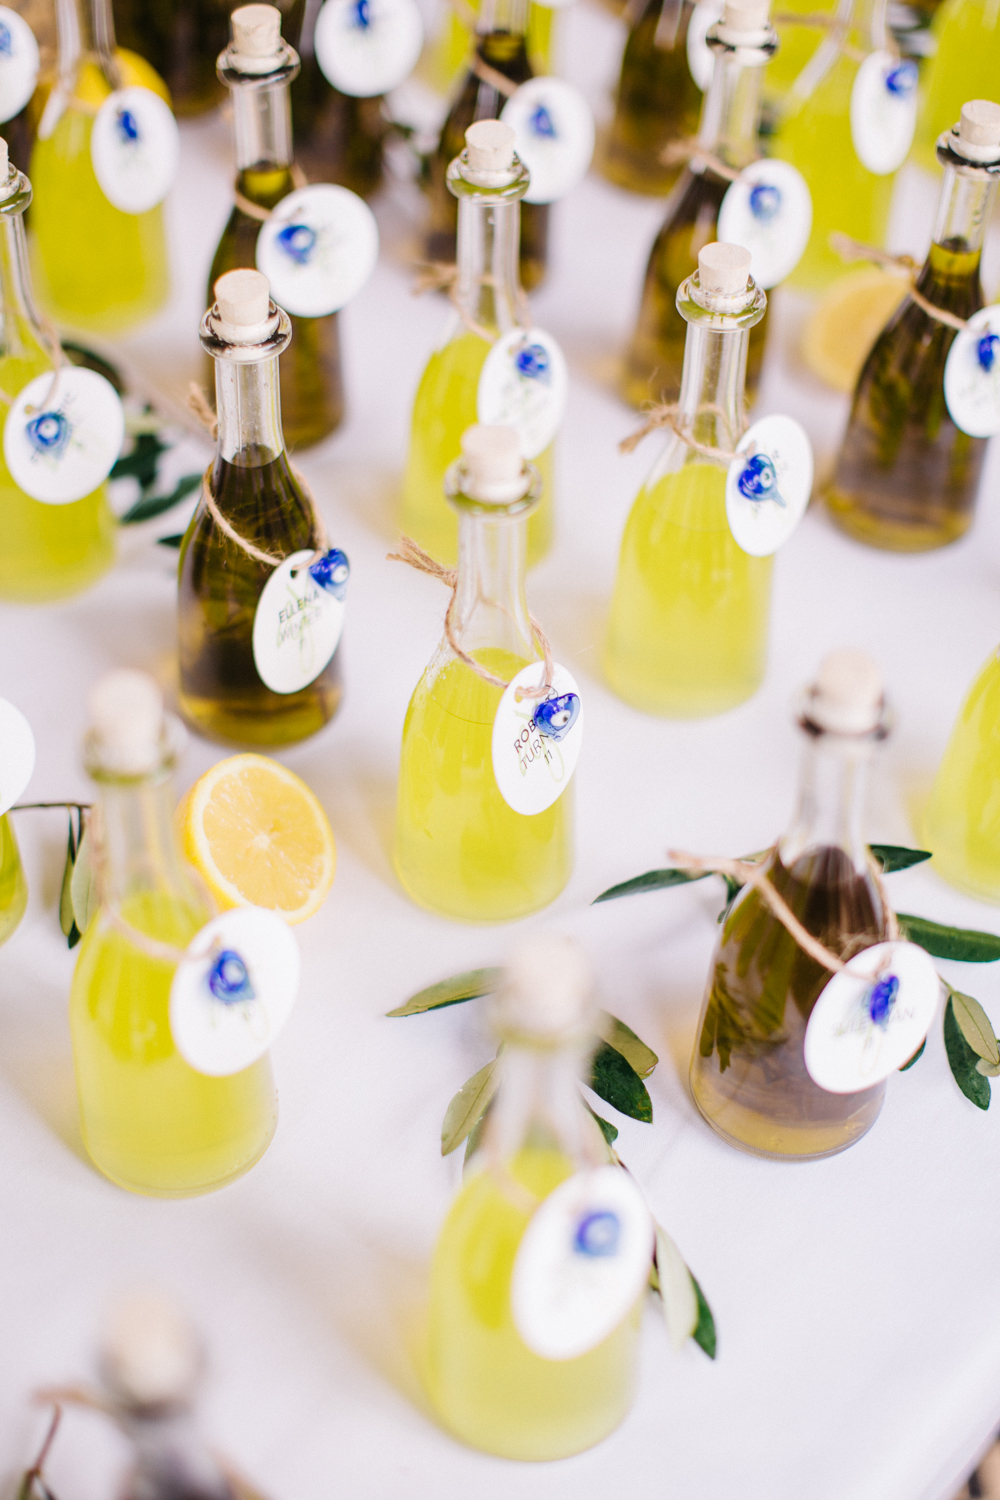 23 Chic DIY Wedding Favors Guests Will Love ⋆ Ruffled